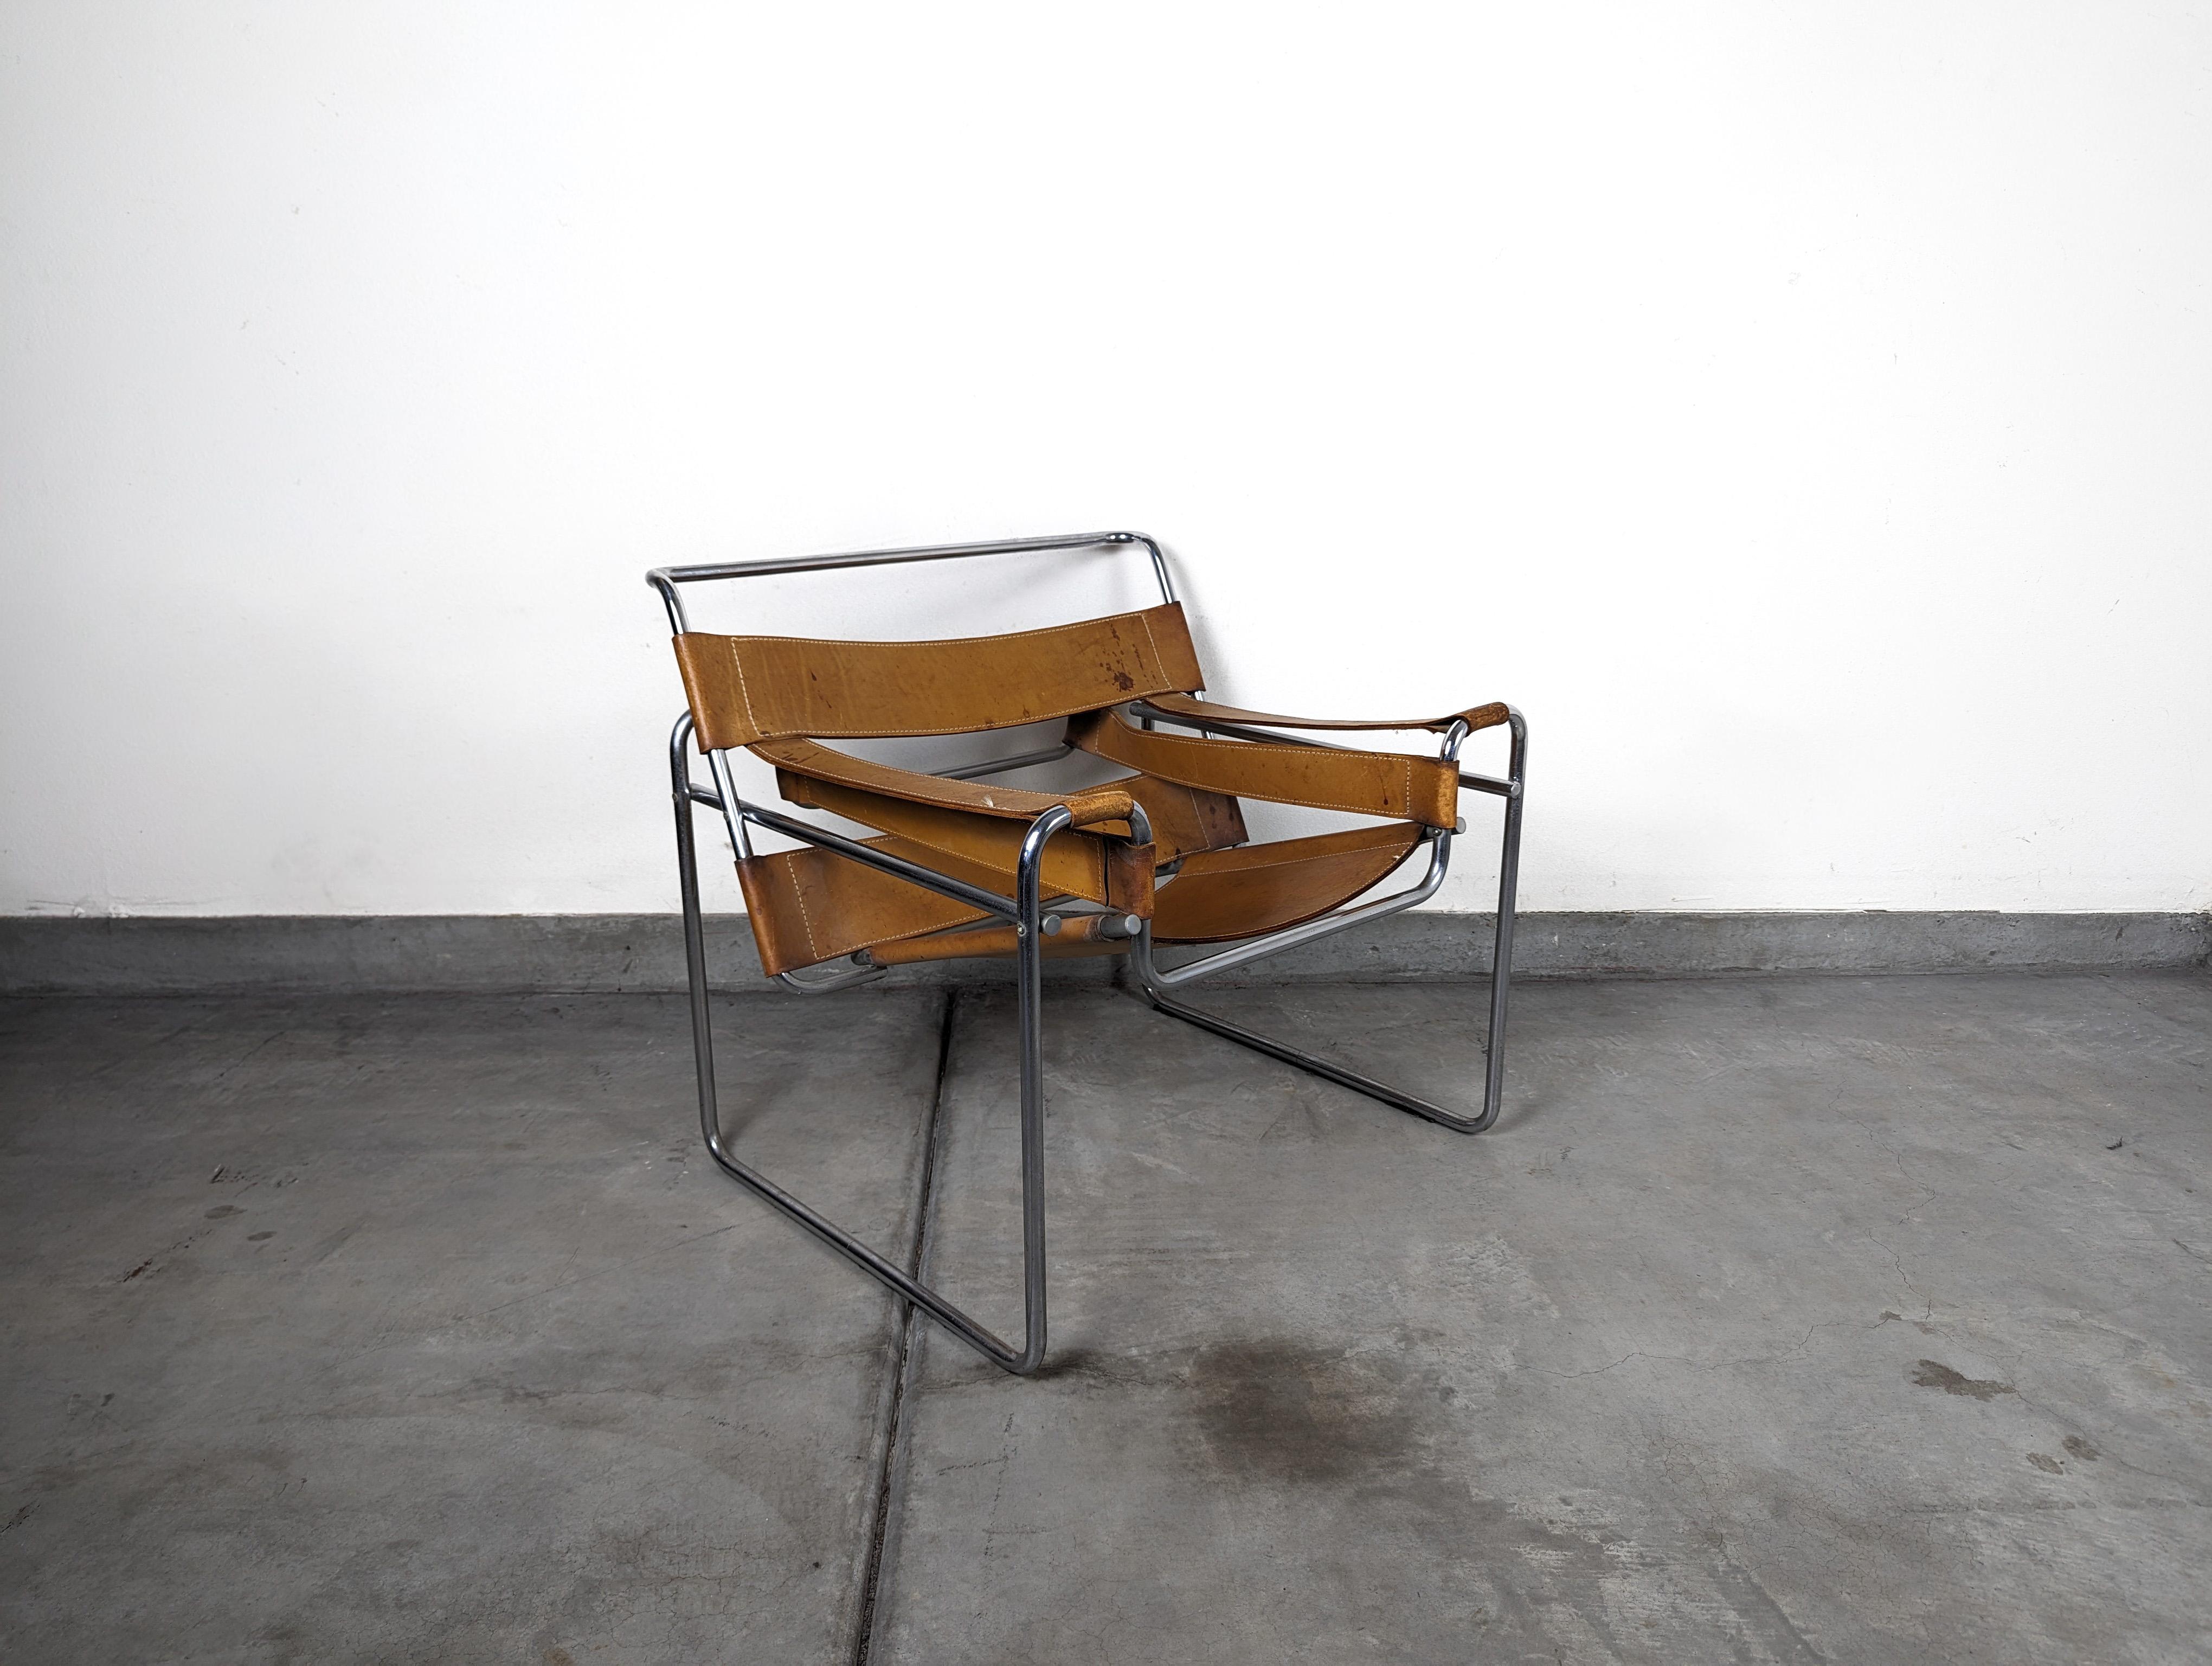 For sale is a genuine mid-century Wassily Chair, a remarkable piece from the iconic designer Marcel Breuer. This chair is a testament to the enduring appeal of mid-century design, showcasing the clean lines and innovative materials that characterize